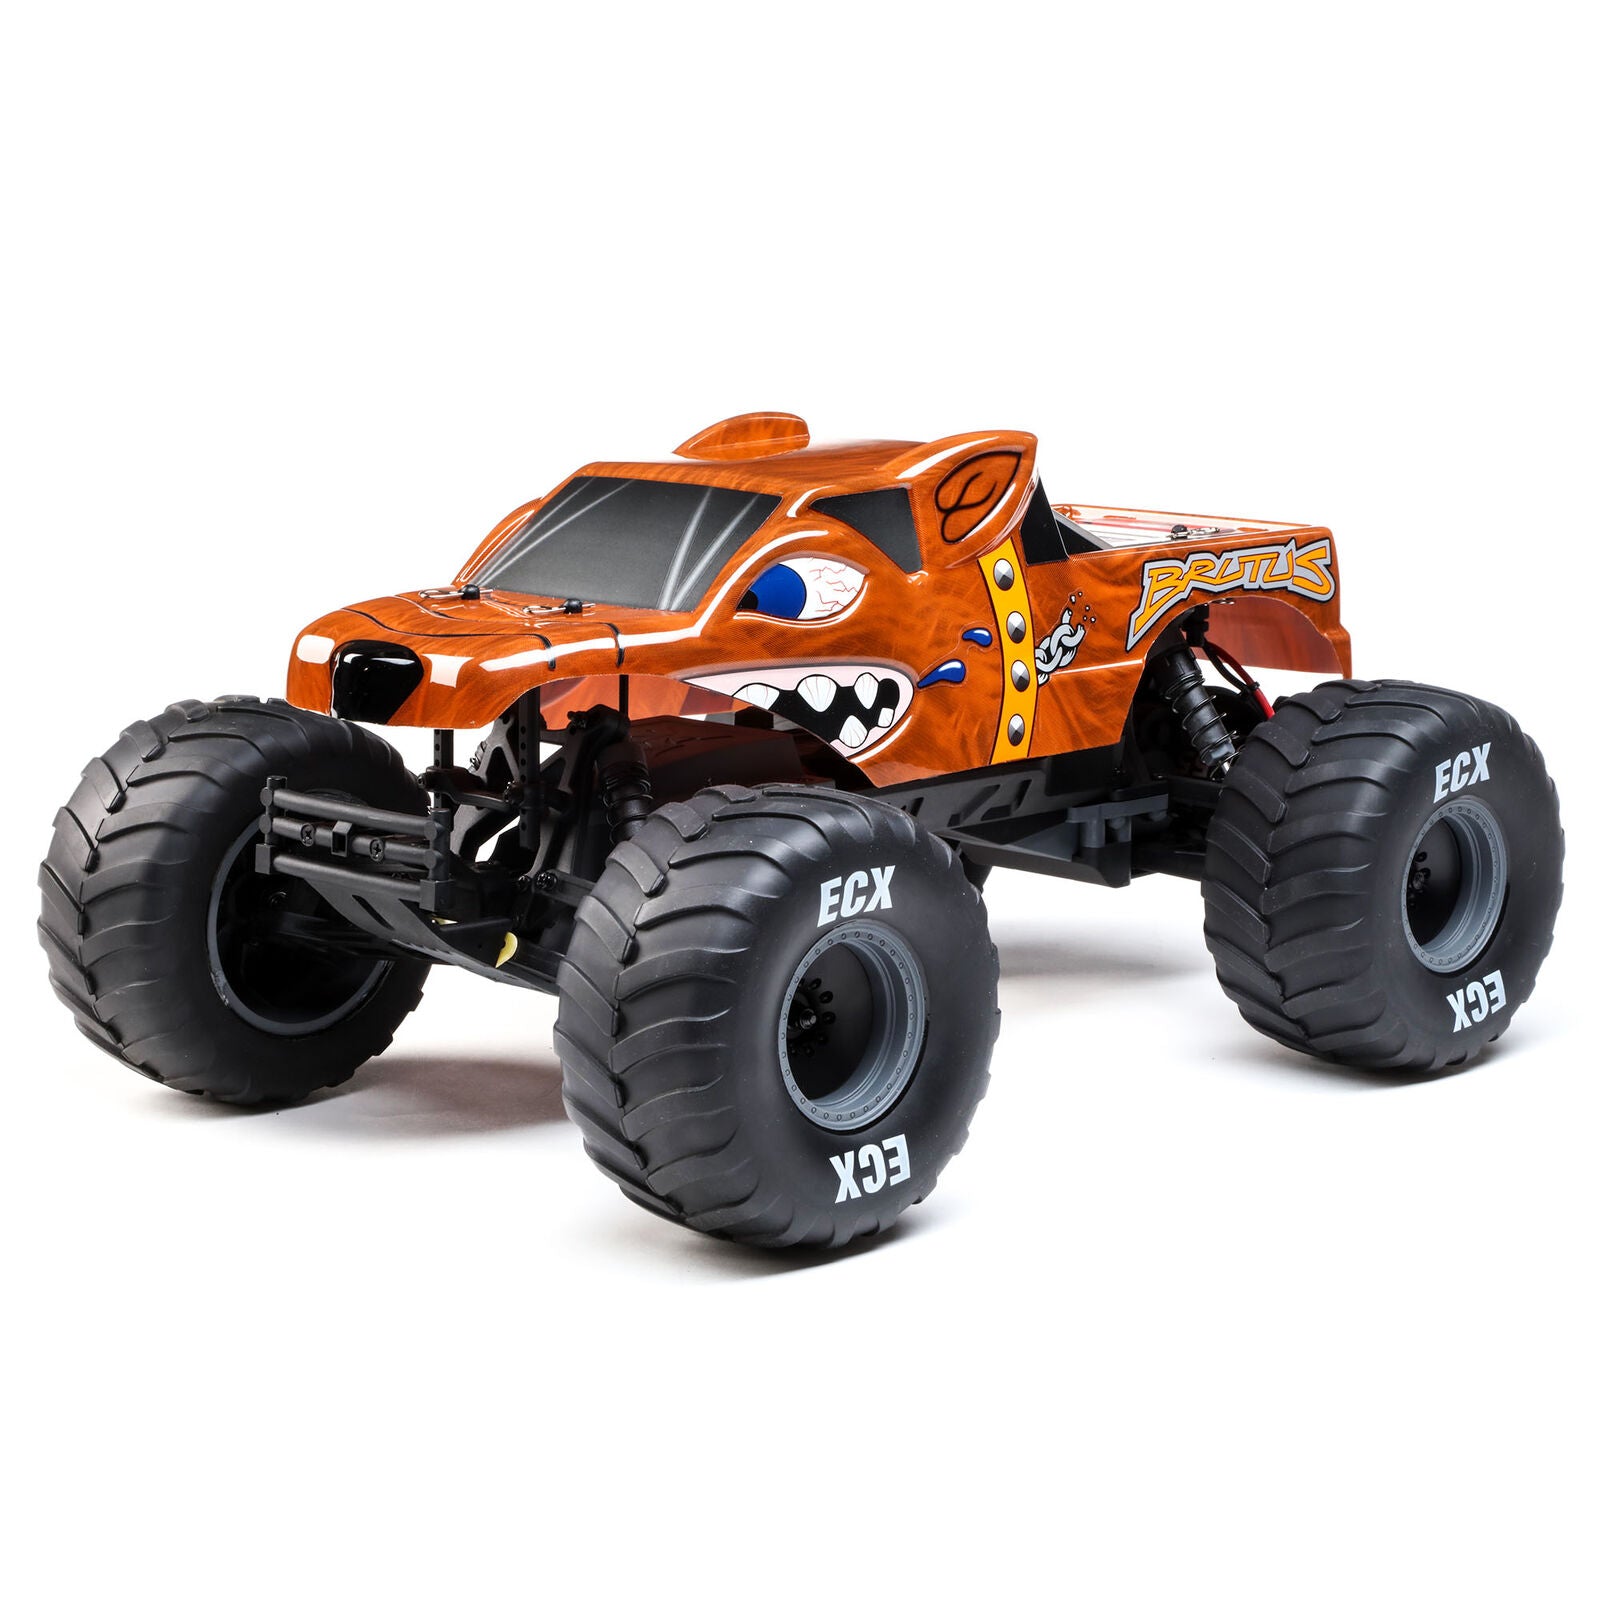 ECX ECX03055 1/10 Brutus 2WD Monster Truck Brushed RTR